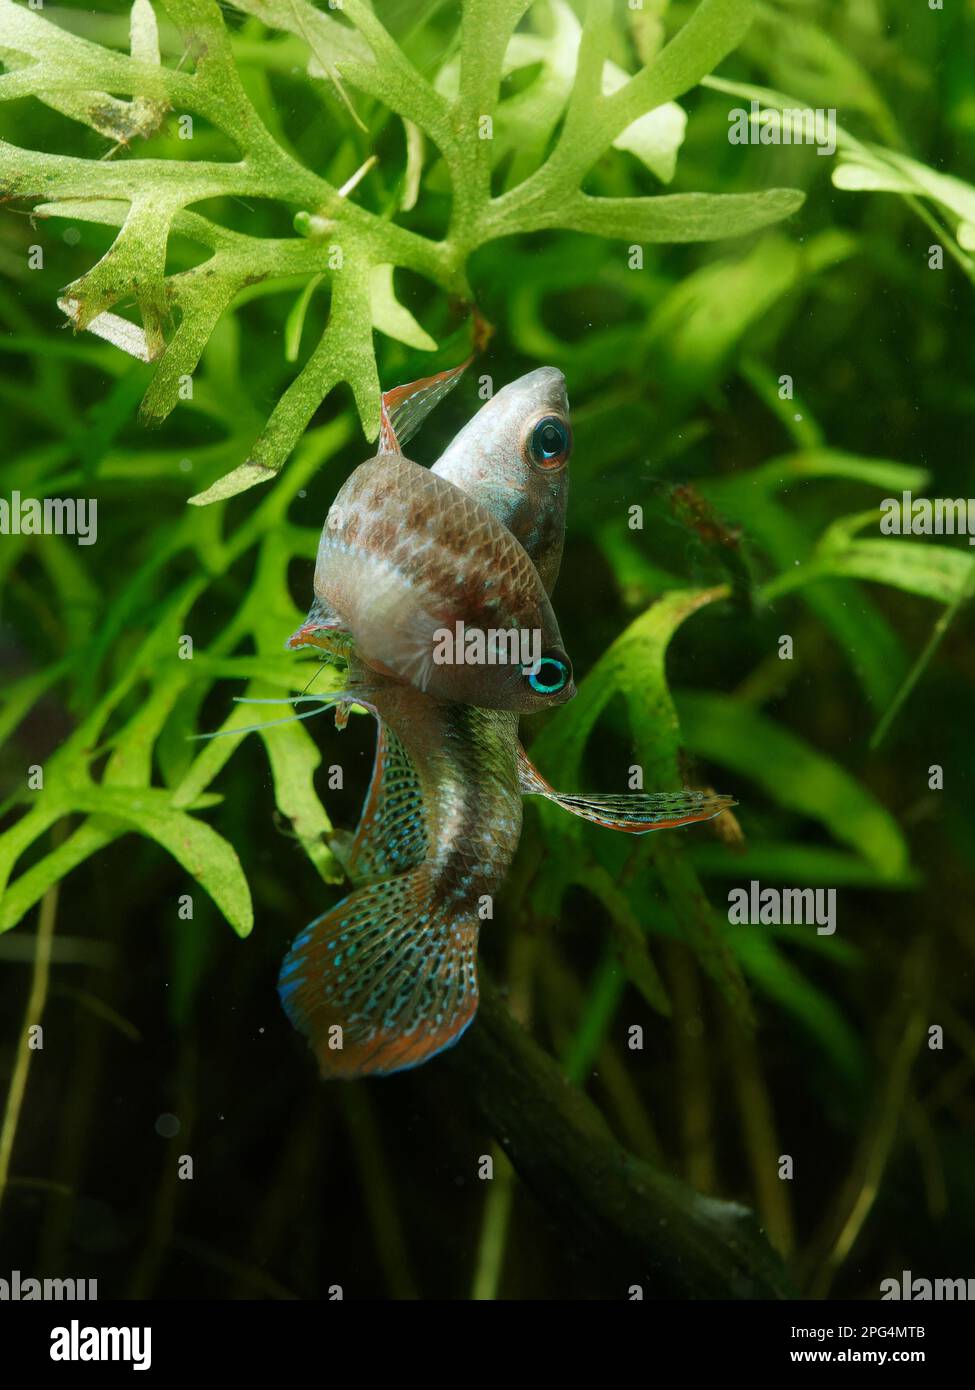 Pair of sparkling gourami (Trichopsis pumila) mating in front of water sprite plant (Ceratopteris sp.) Stock Photo